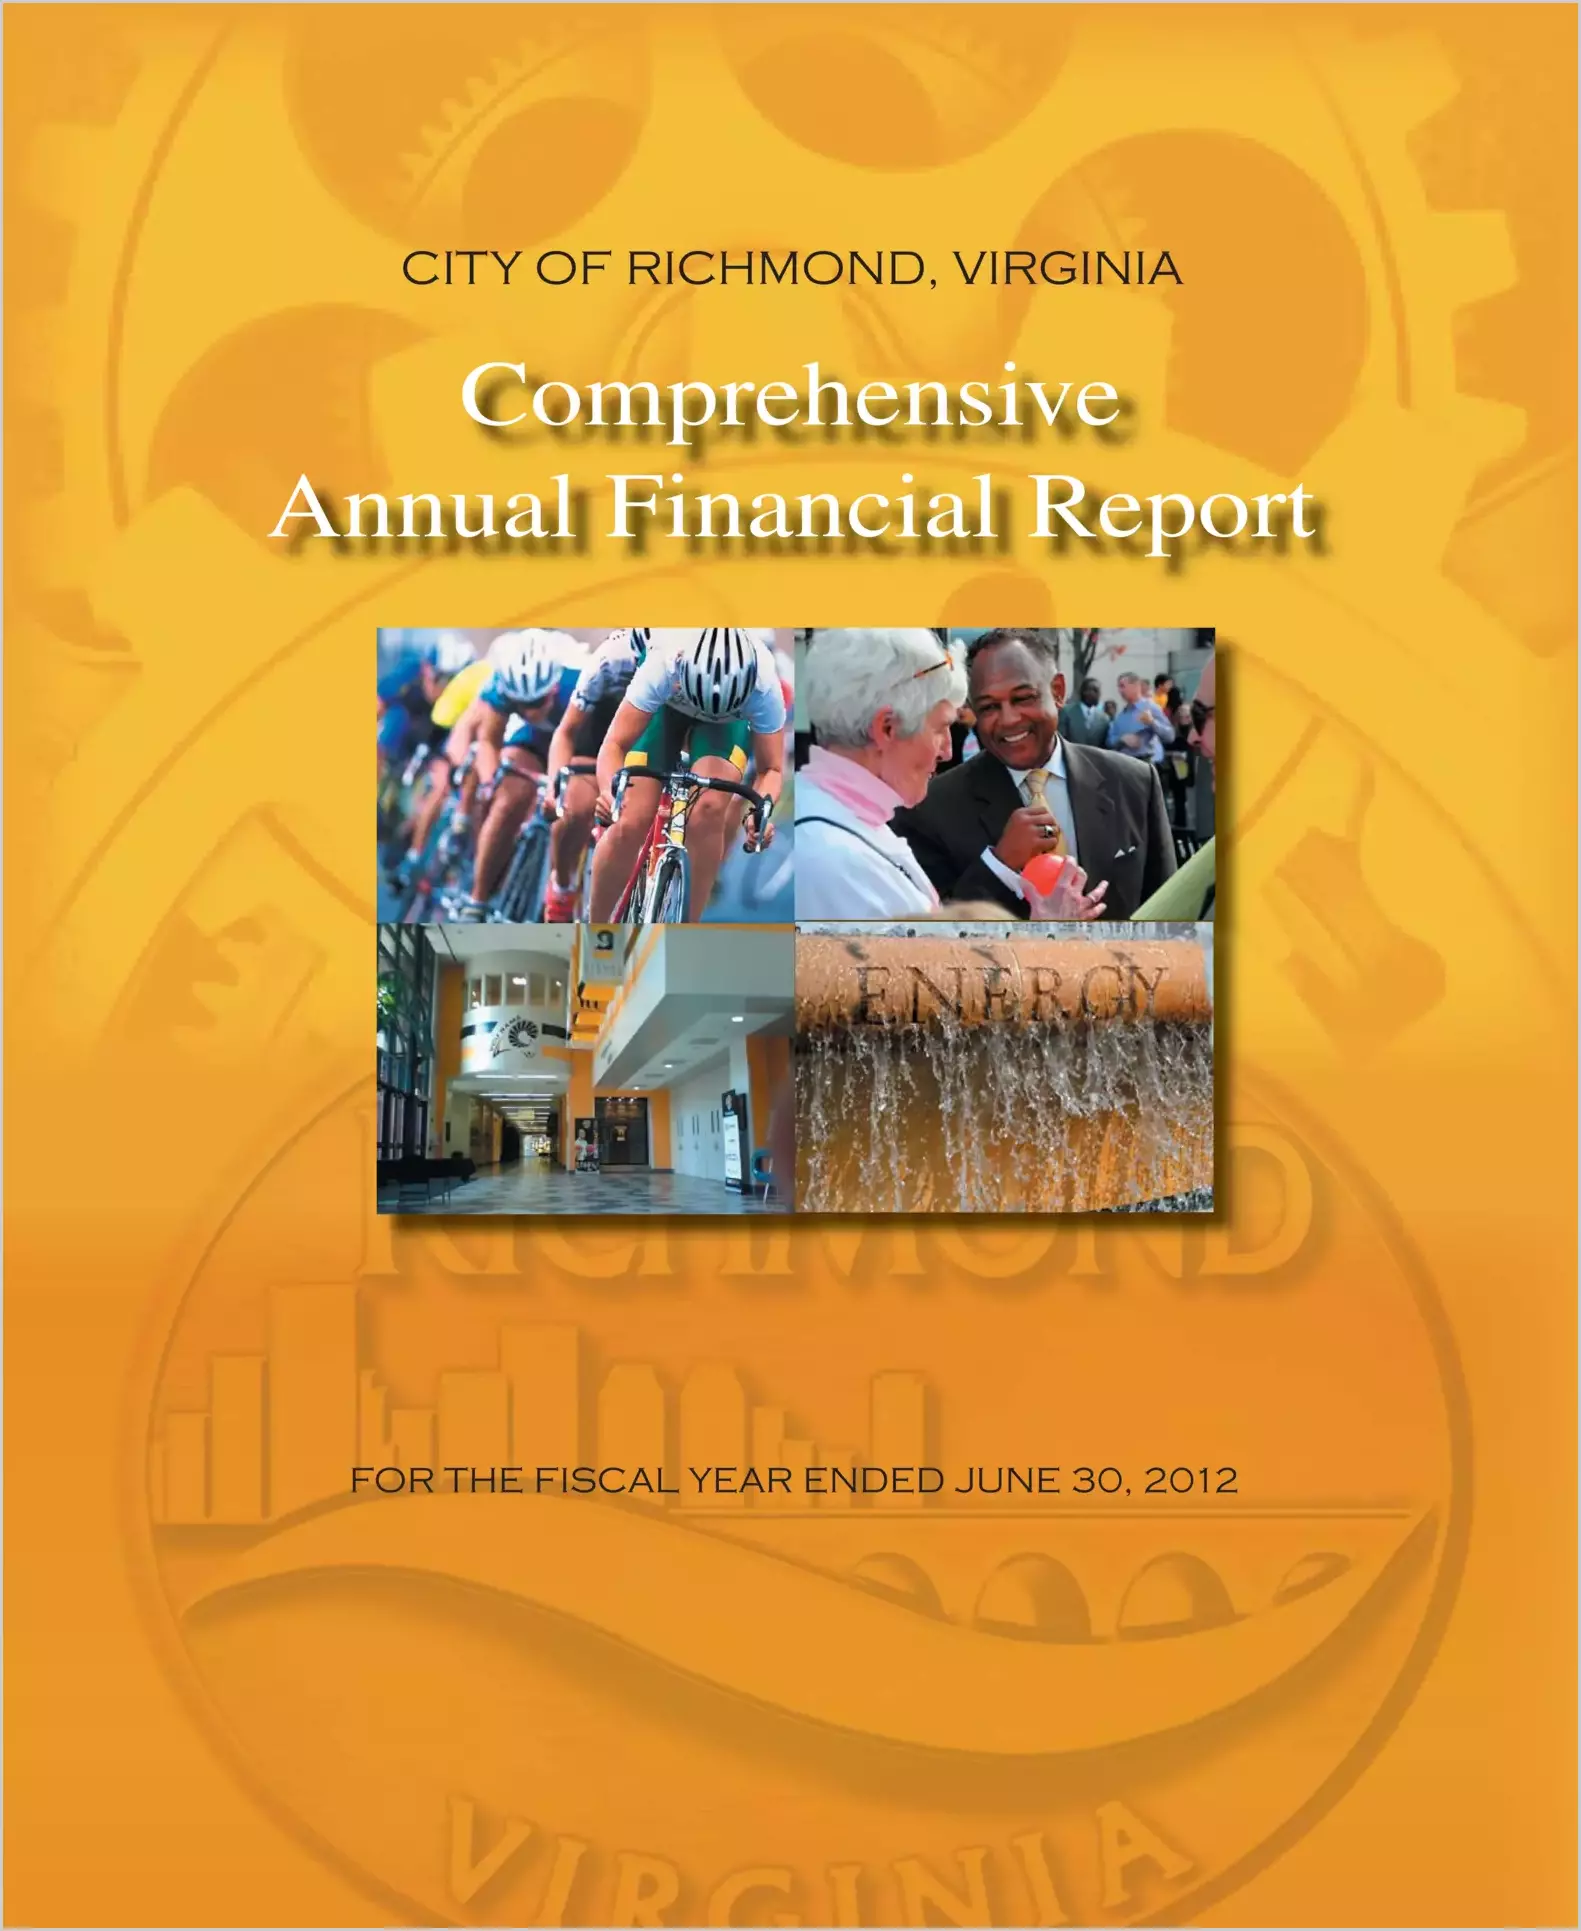 2012 Annual Financial Report for City of Richmond